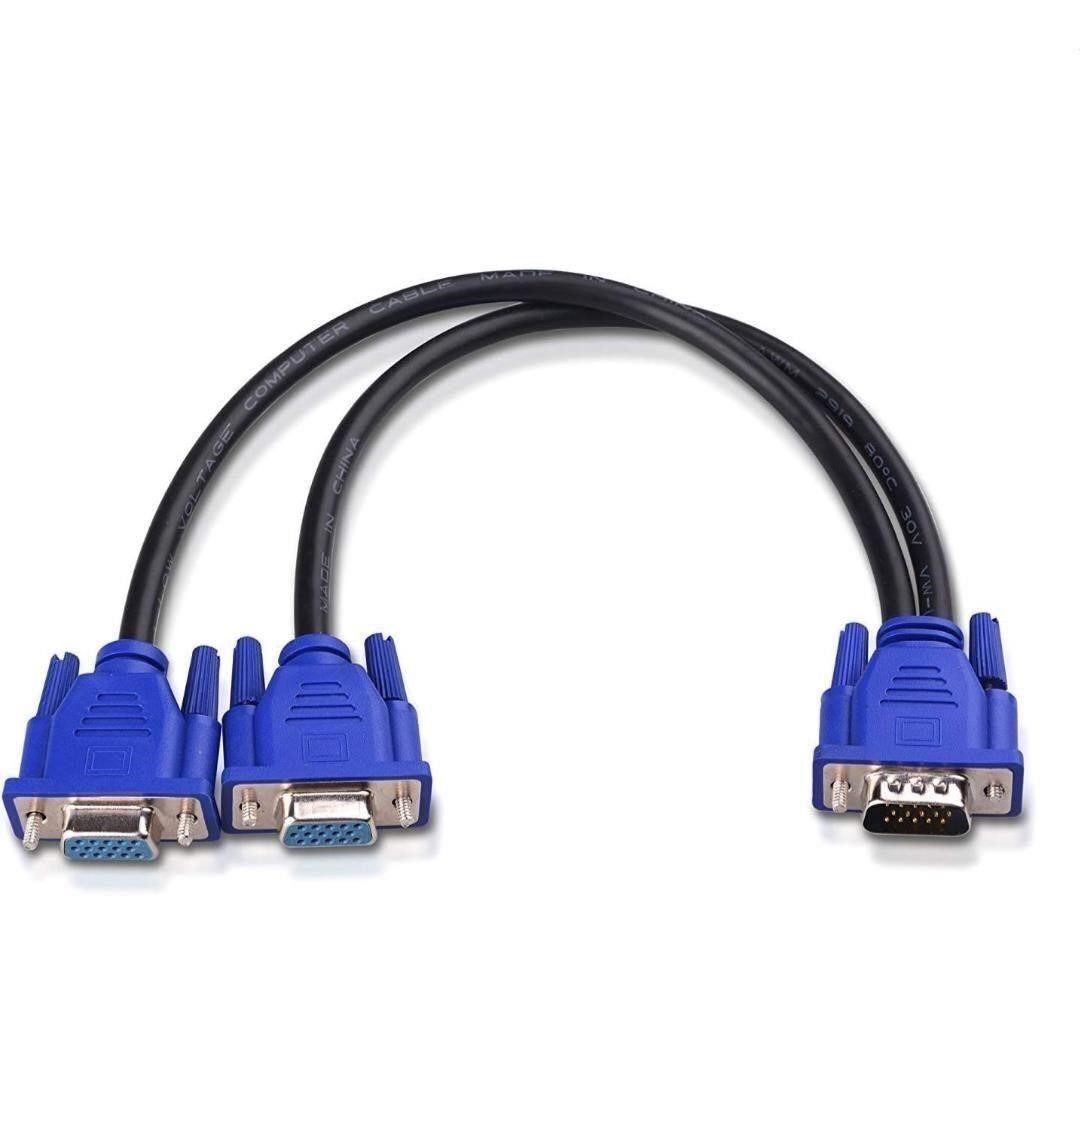 1FT FULL HD 1080P VGA SPLITTER CABLE (VGA Y CABLE)